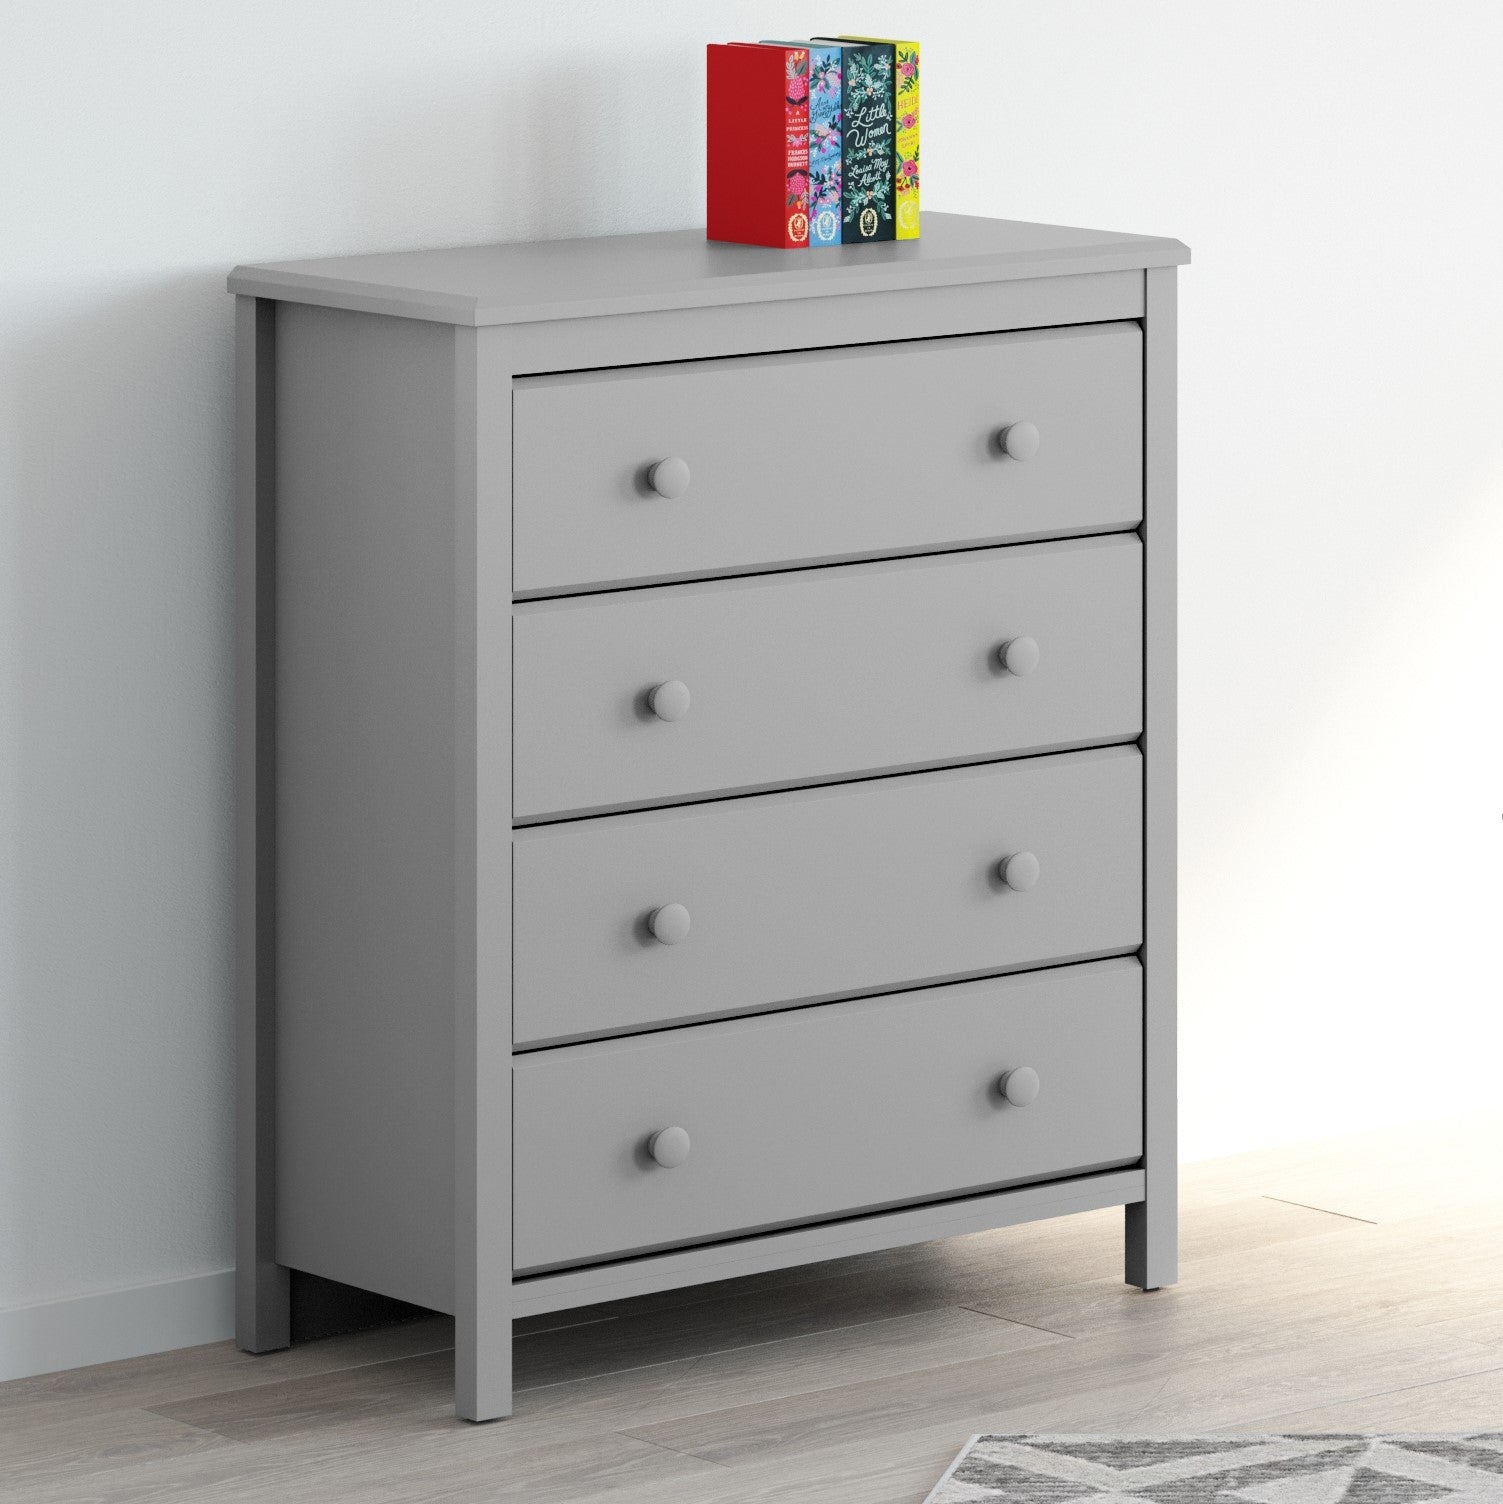 Pebble gray 4 drawer chest in nursery